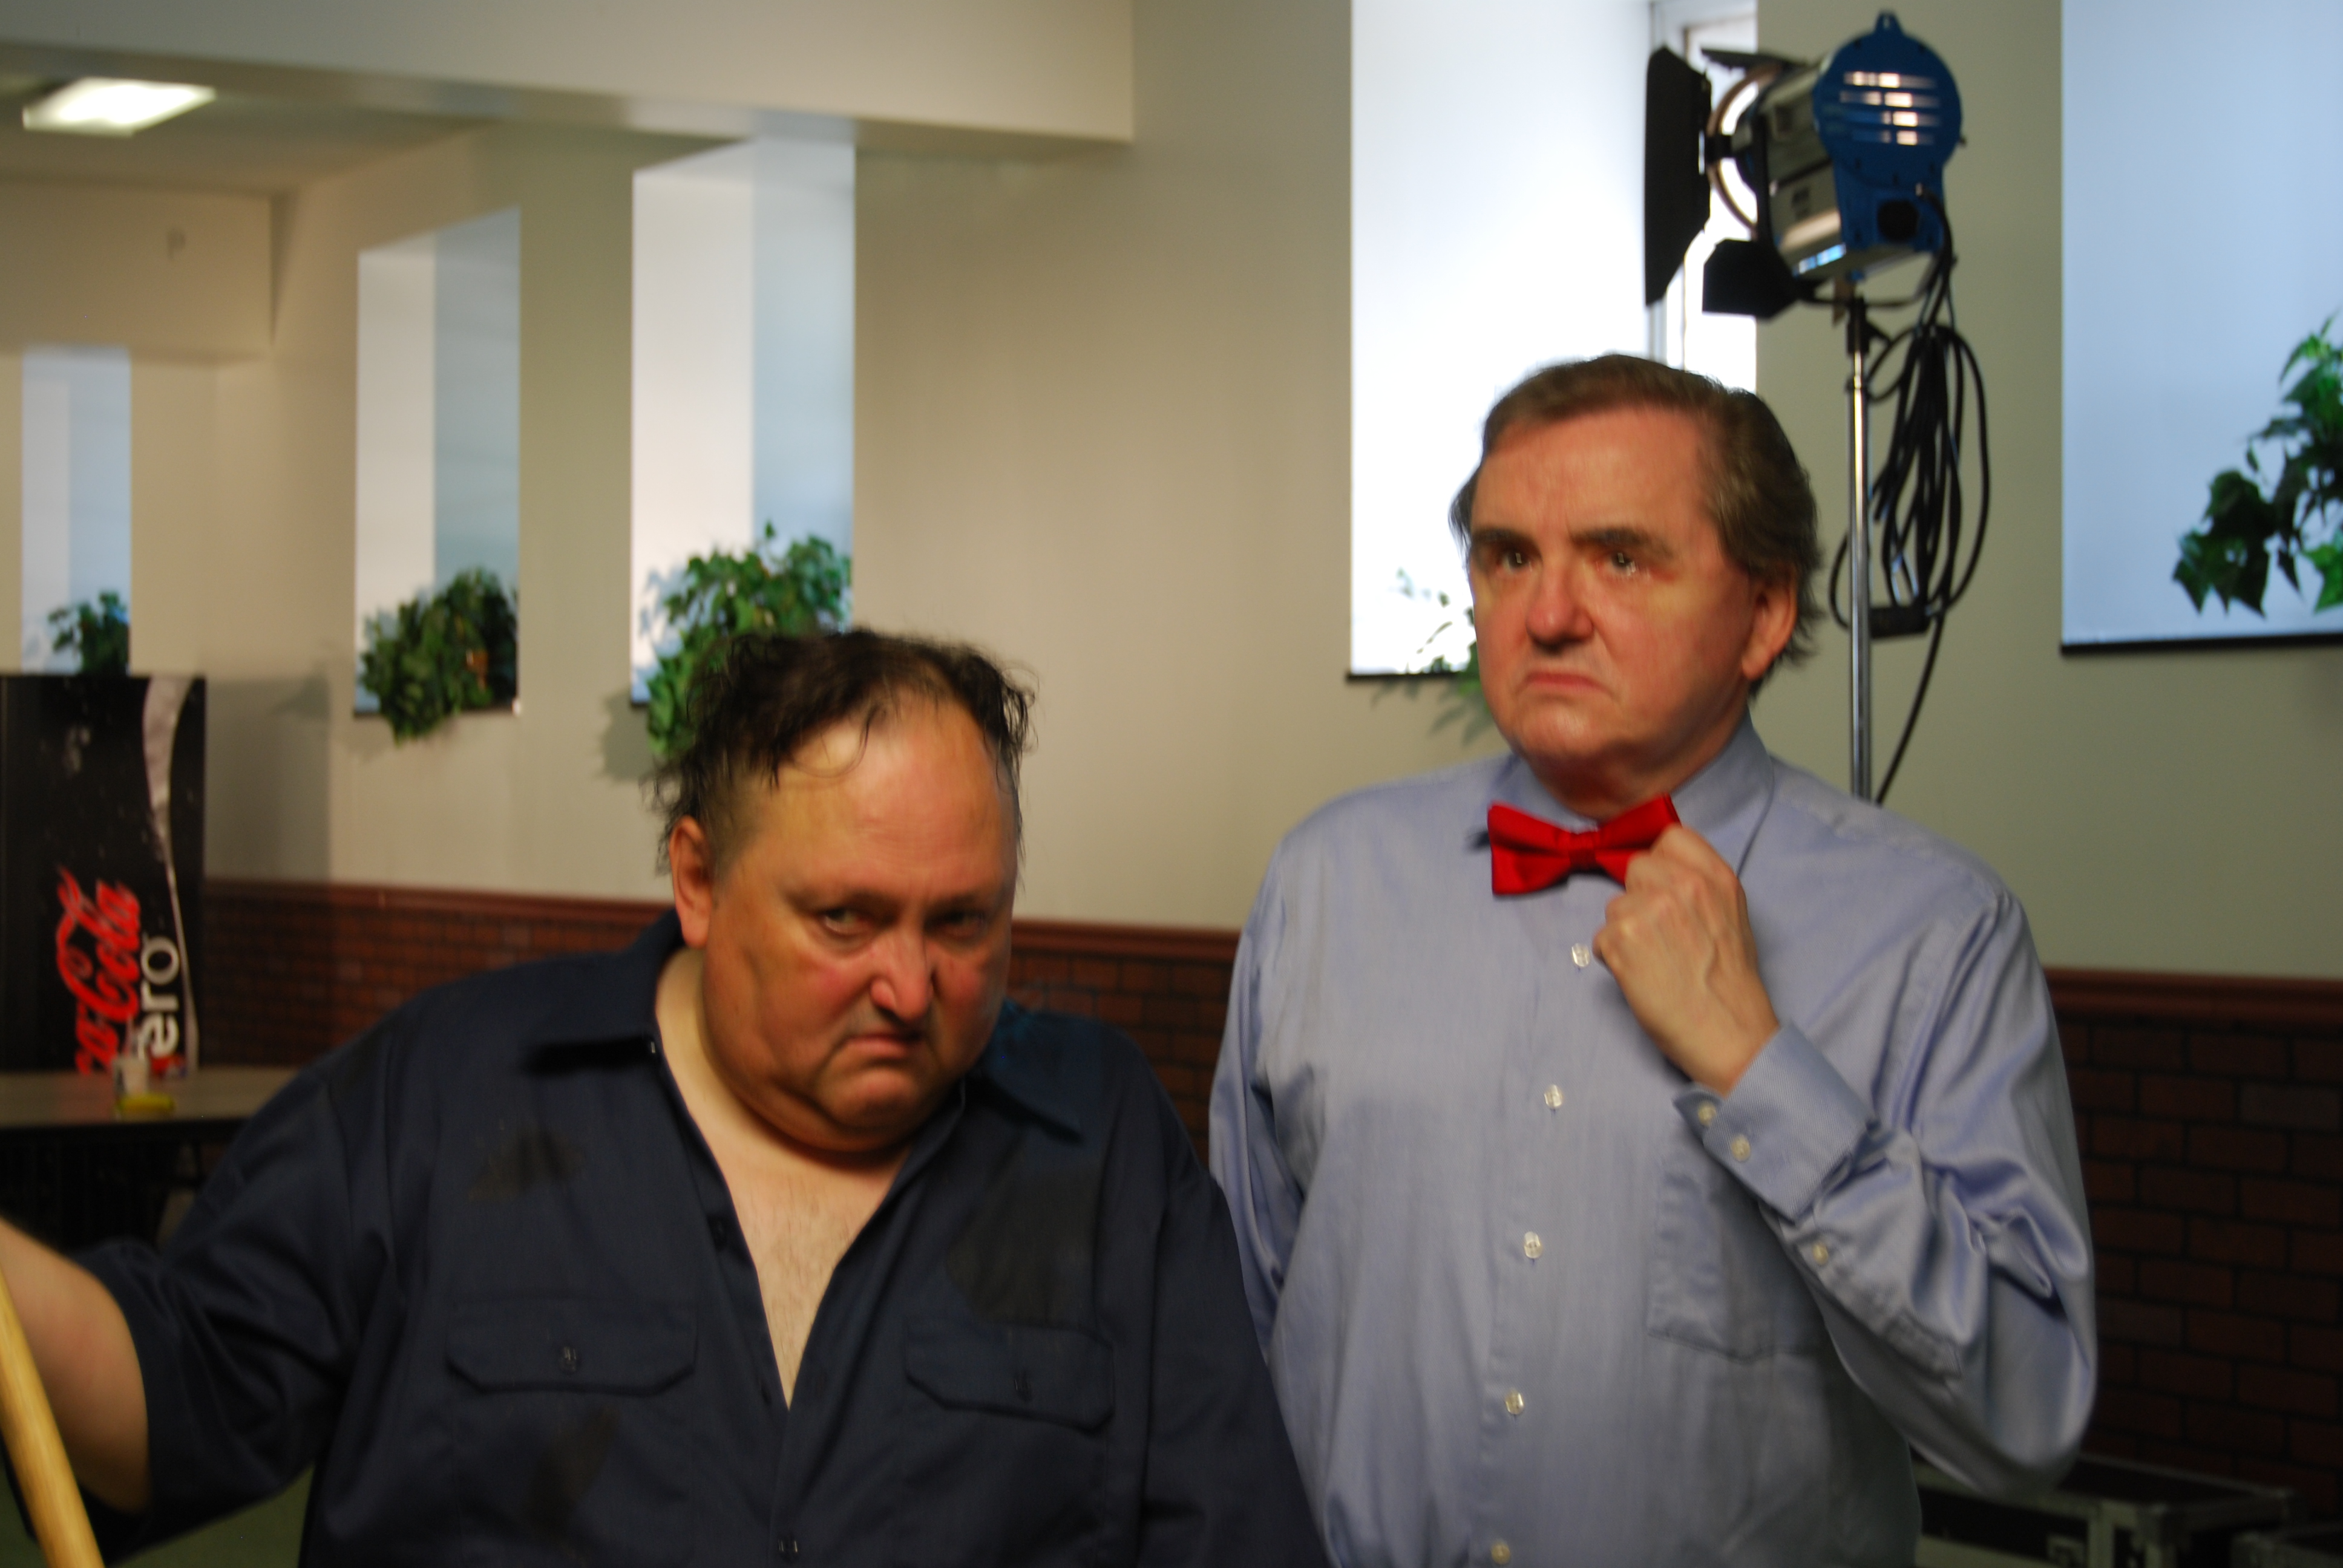 Lee Armstrong & George Stover in Midnight Crew Studios film 